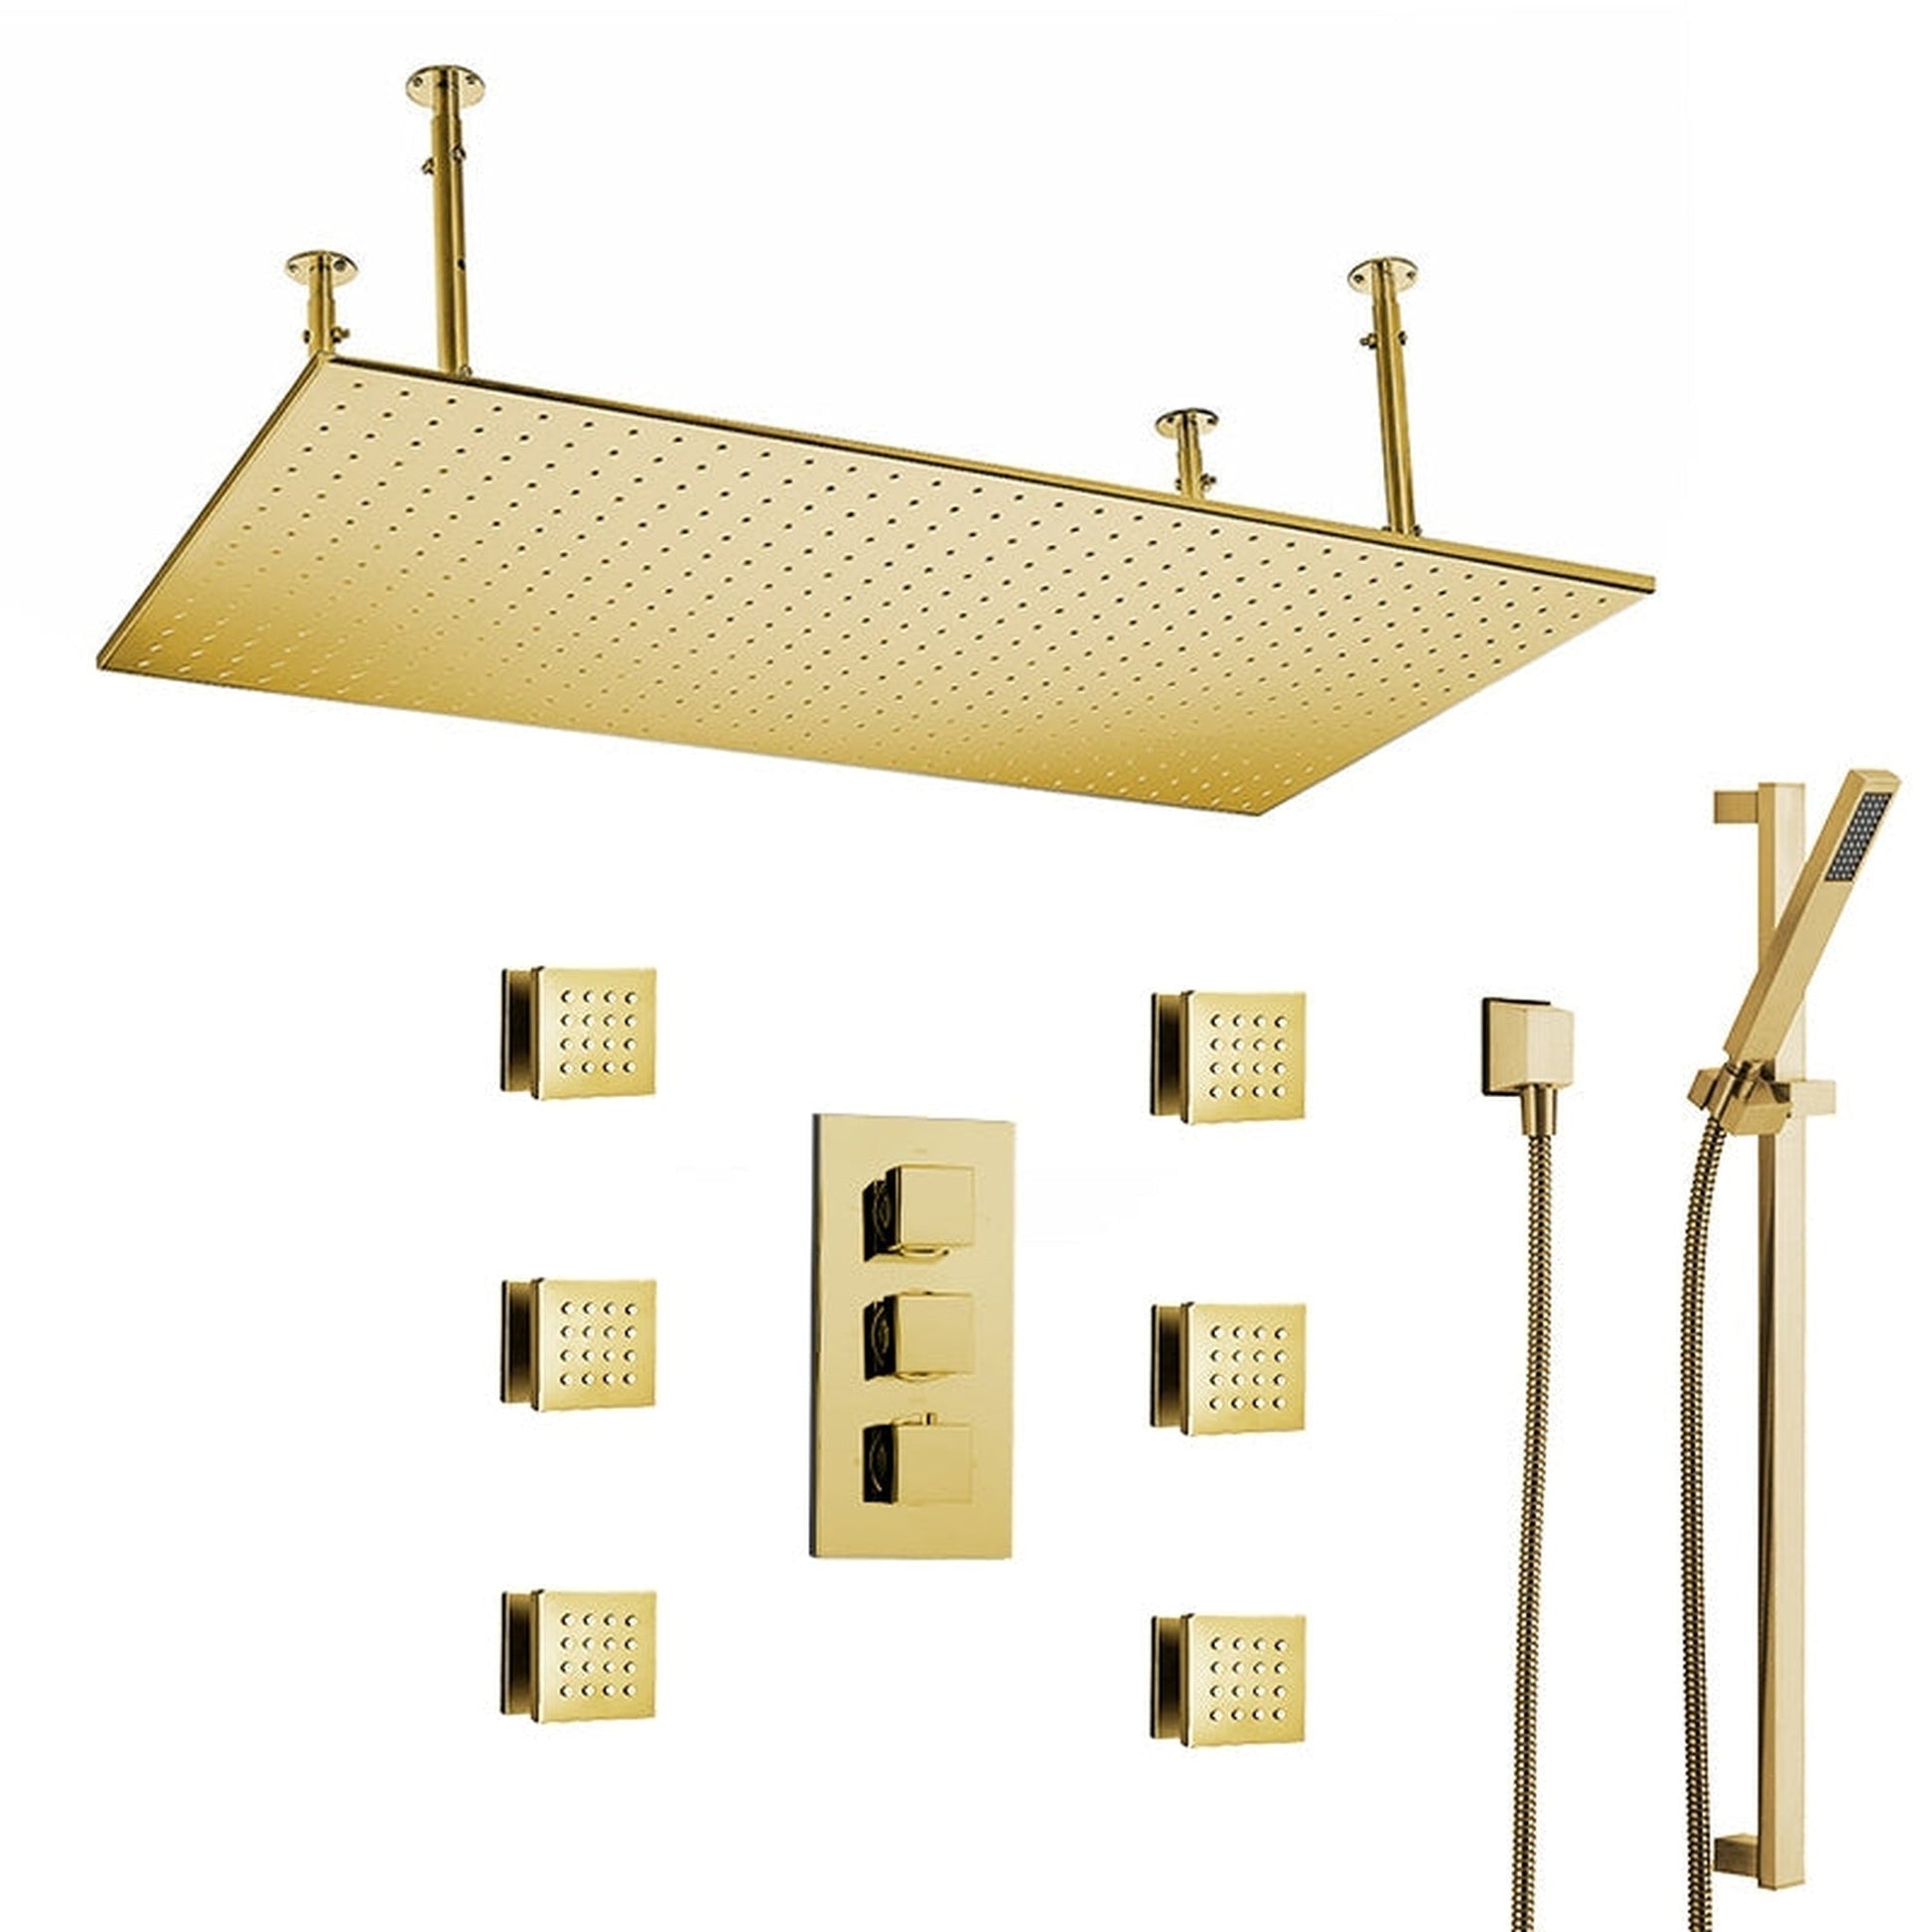 https://usbathstore.com/cdn/shop/products/Fontana-Diadema-Creative-Luxury-Large-Brushed-Gold-Rectangular-Ceiling-Mounted-LED-Solid-Brass-Shower-Head-Rain-Shower-System-With-6-Jet-Body-Sprays-and-Hand-Shower.jpg?v=1678499659&width=1946